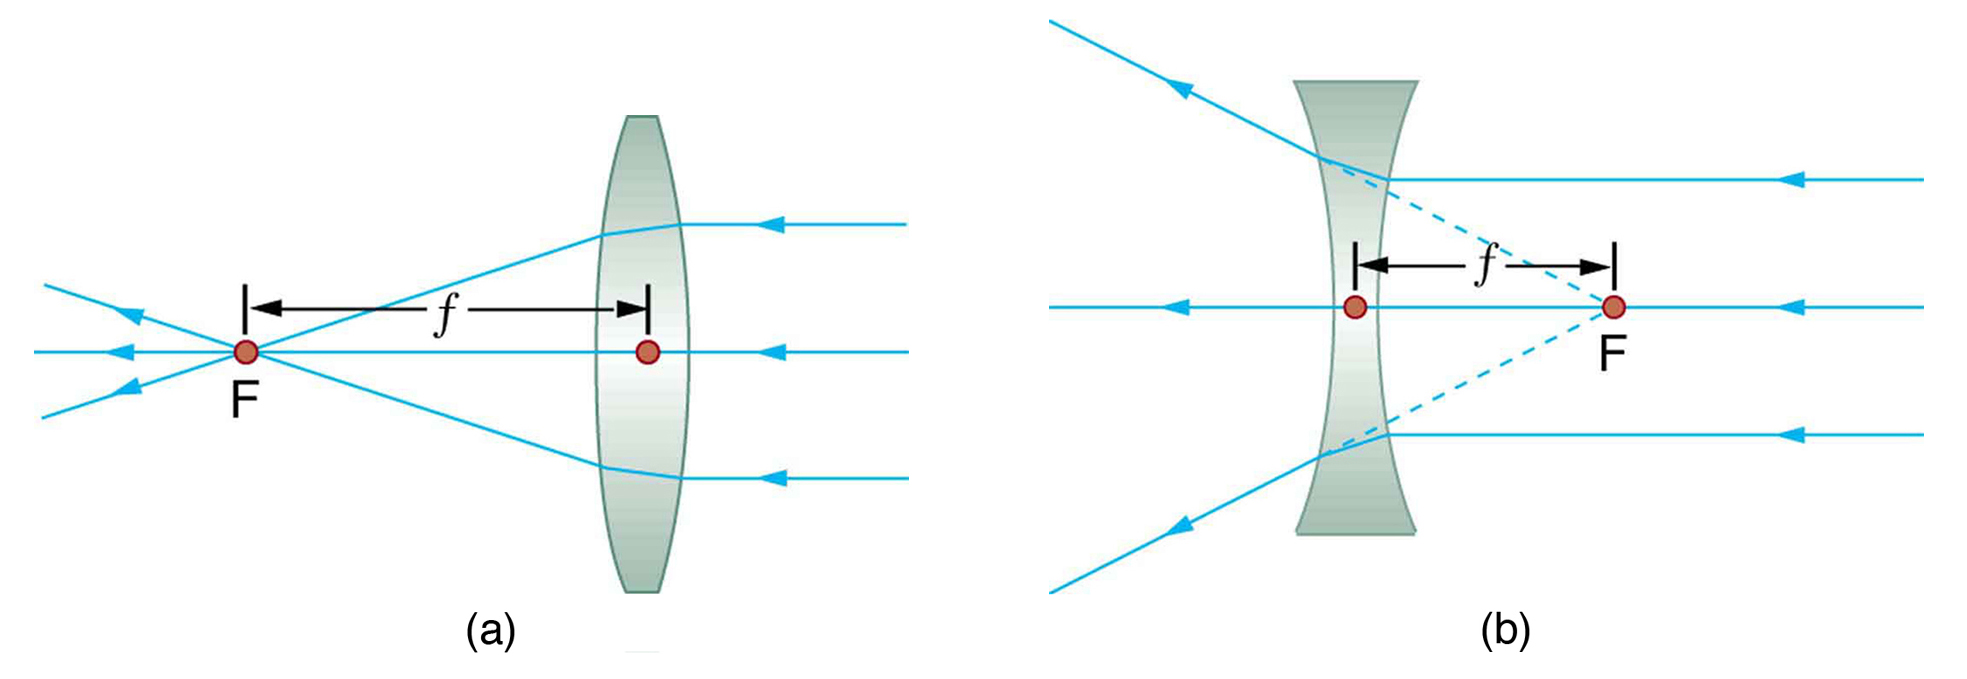 Figure (a) shows three parallel rays incident on the right side of a convex lens; after refraction they converge at F on the left side of the lens. The distance from the center of the lens to F is small f. Figure (b) shows three parallel rays incident on the right side of a concave lens; after refraction they appear to have come from F on the right side of the lens. The distance from the center of the lens to F is small f.